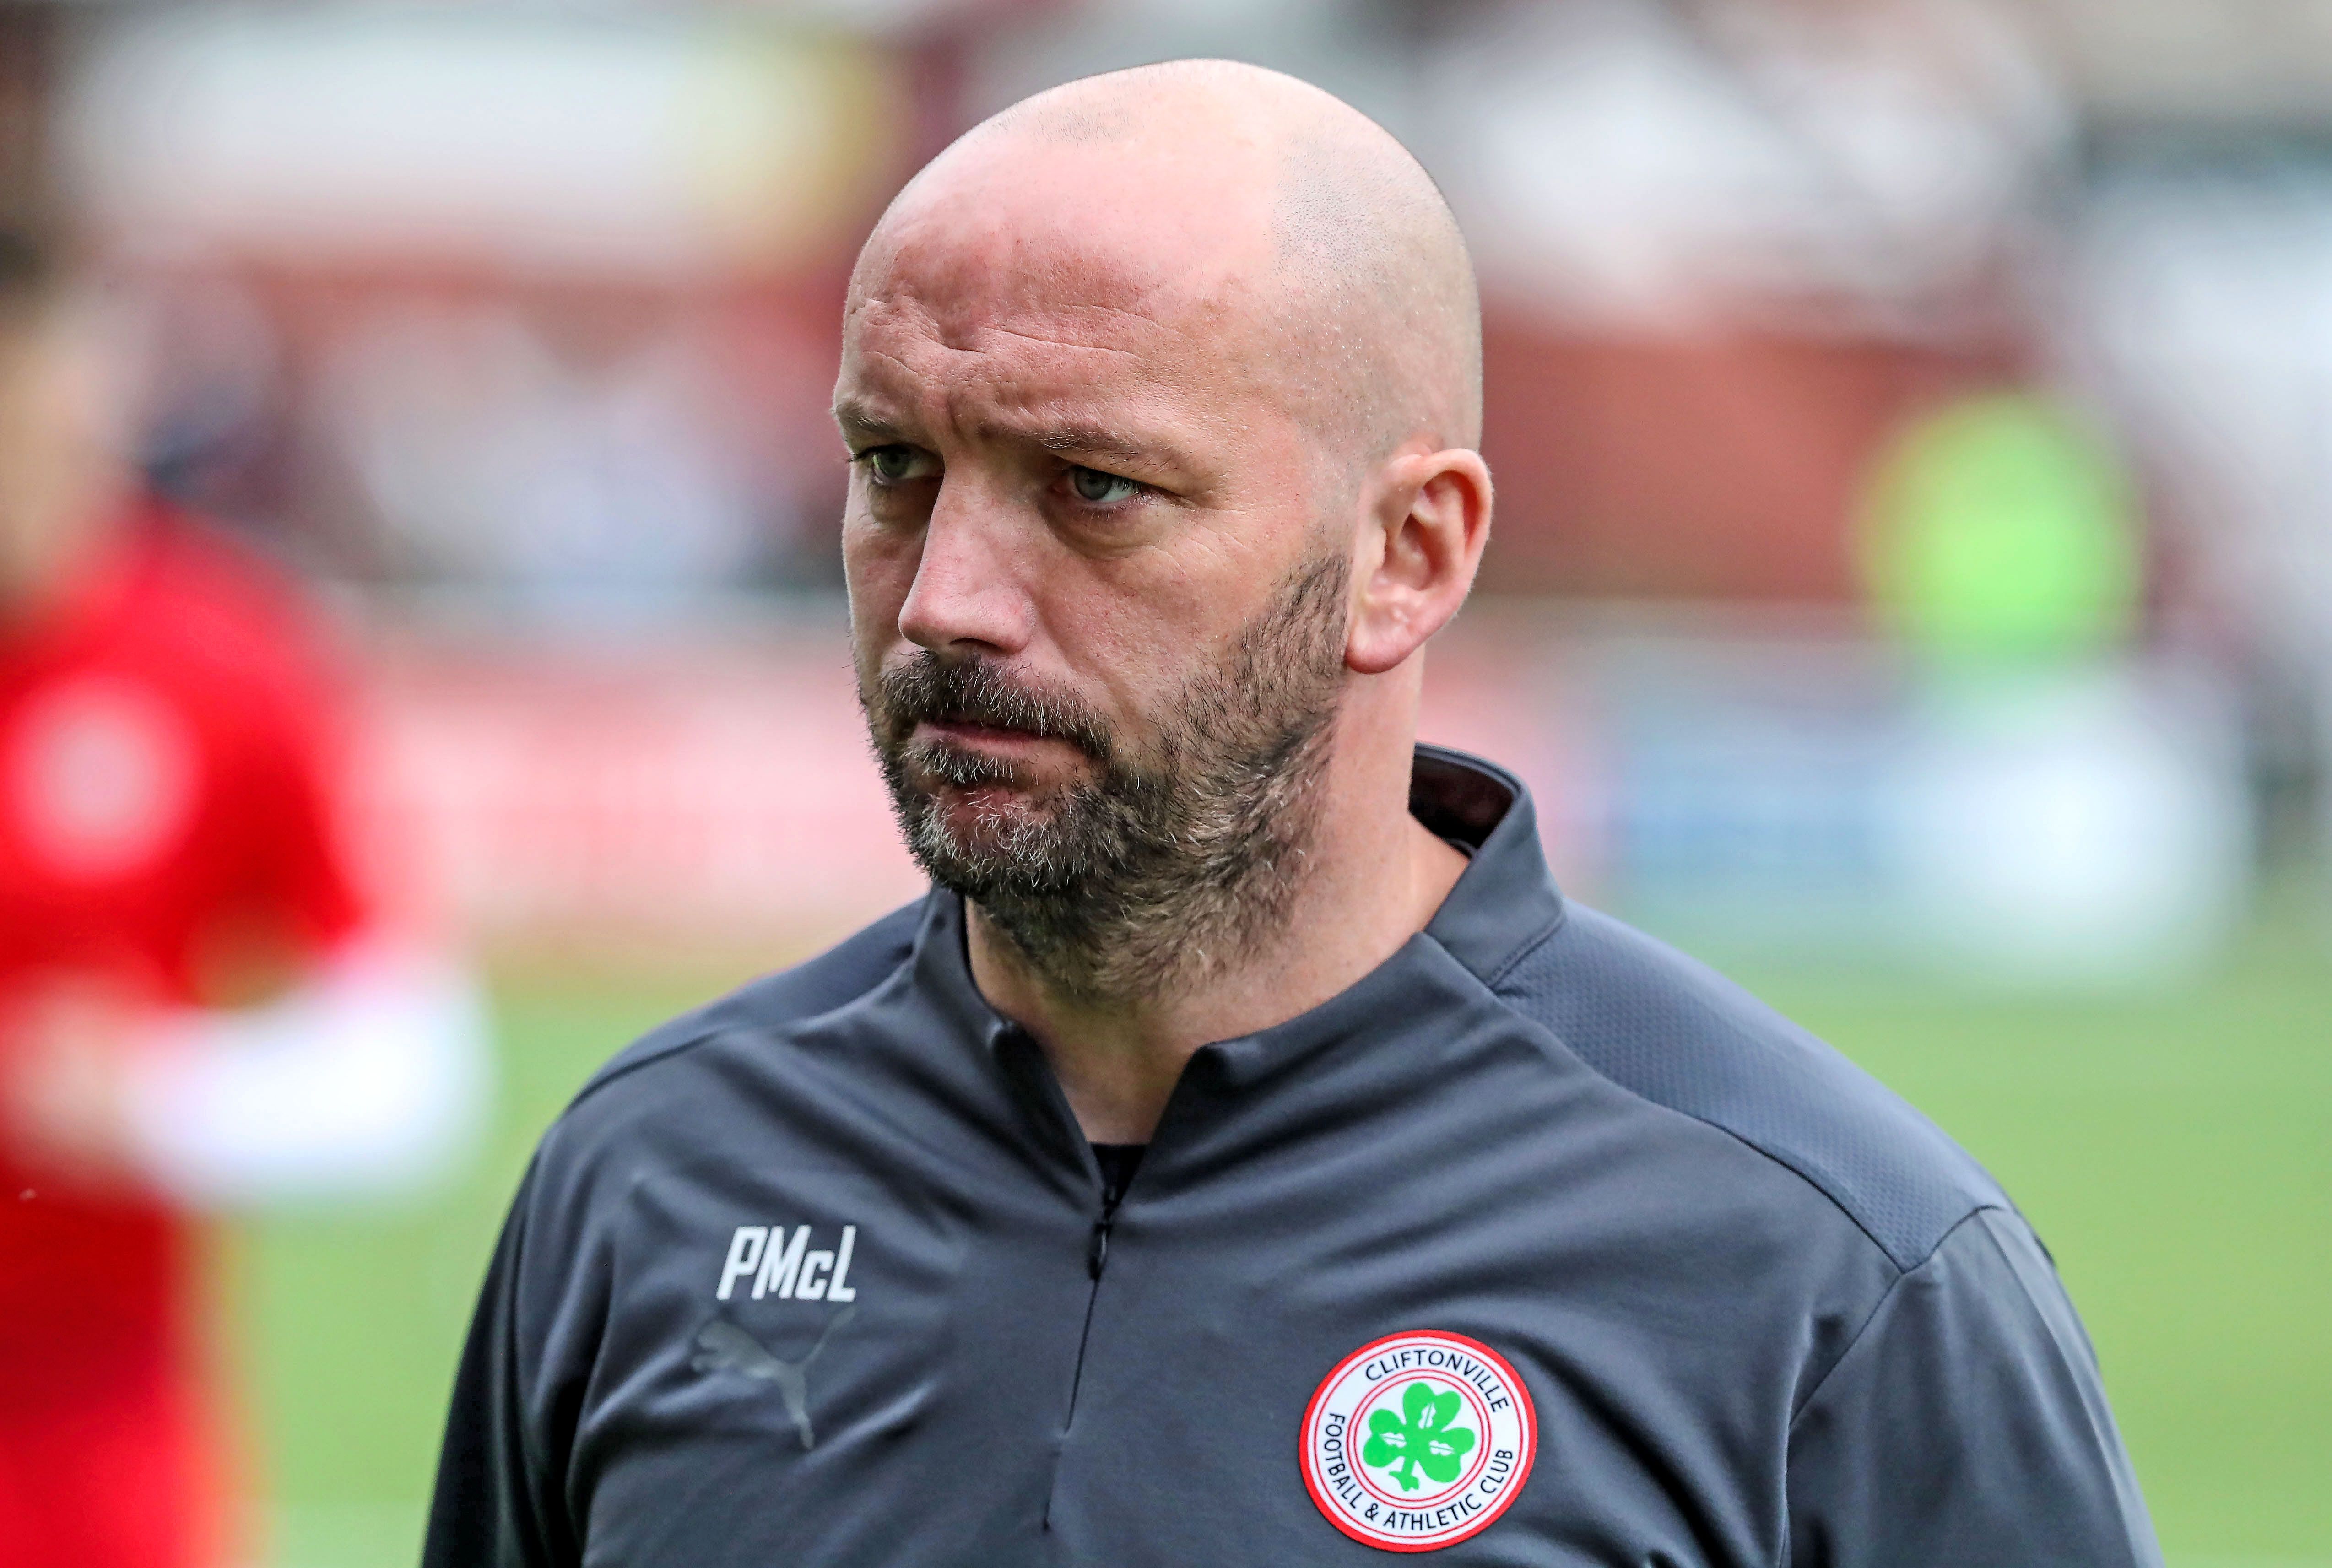 Cliftonville manager Paddy McLaughlin said the return of fans in their numbers has made a big difference 